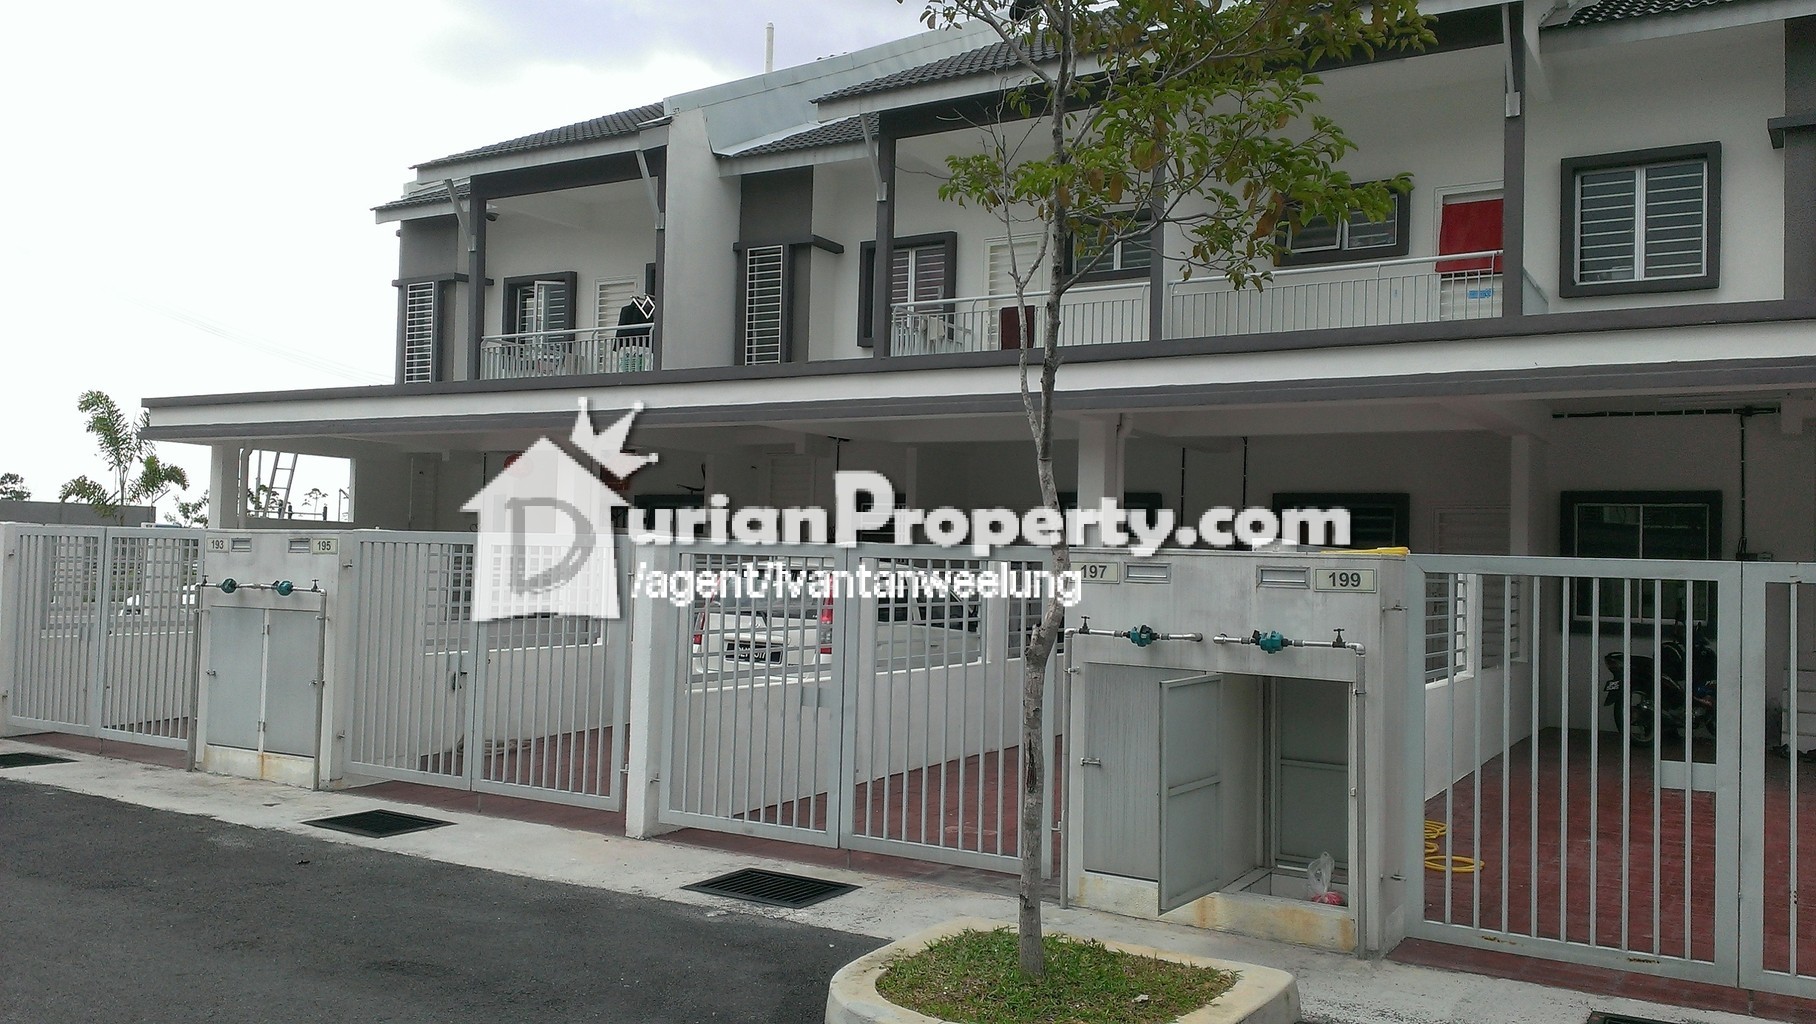 Townhouse For Sale At The Lake Residence Puchong For Rm 458 000 By Ivan Tan Durianproperty